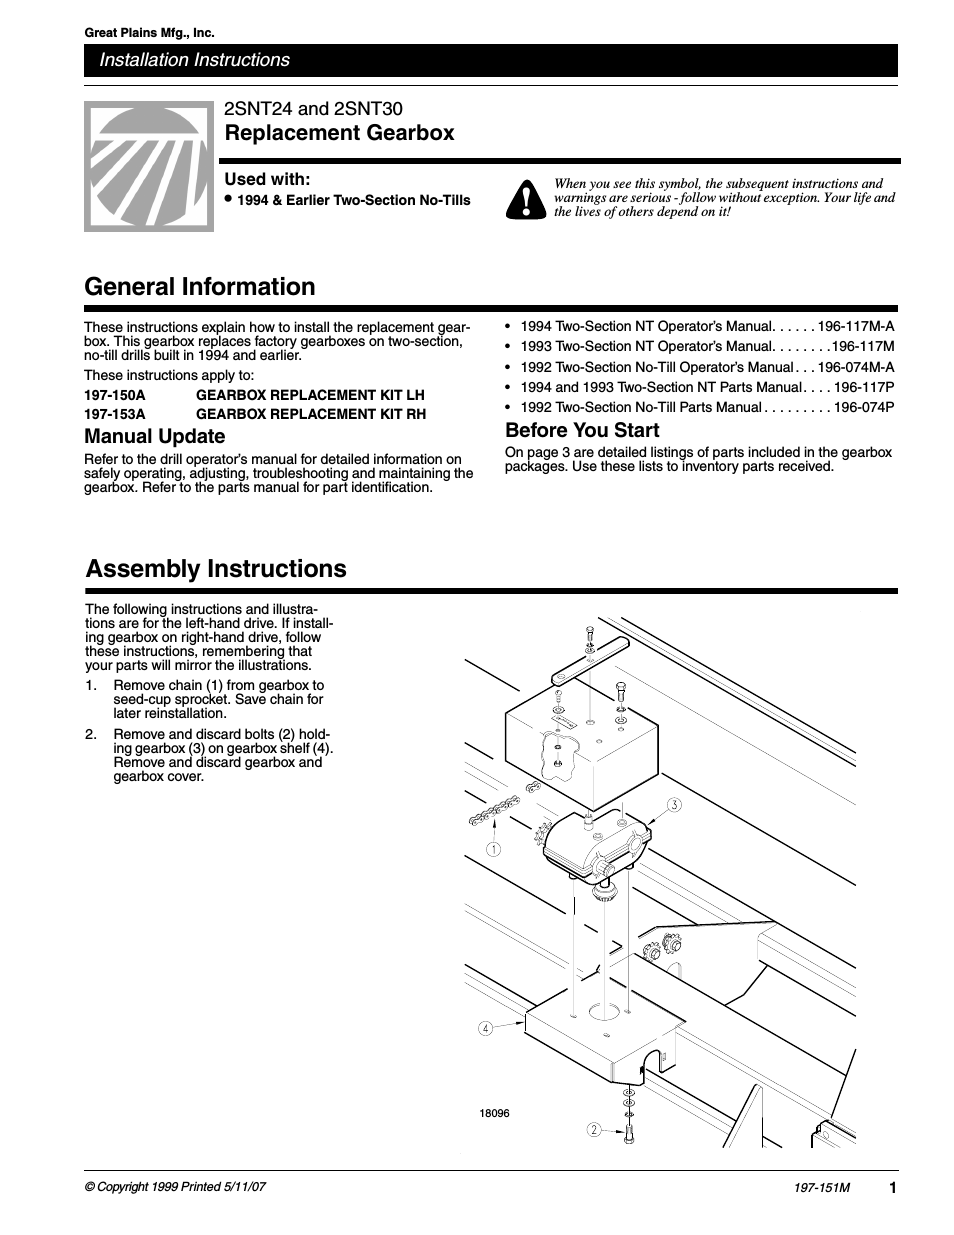 2SNT30 Assembly Instructions